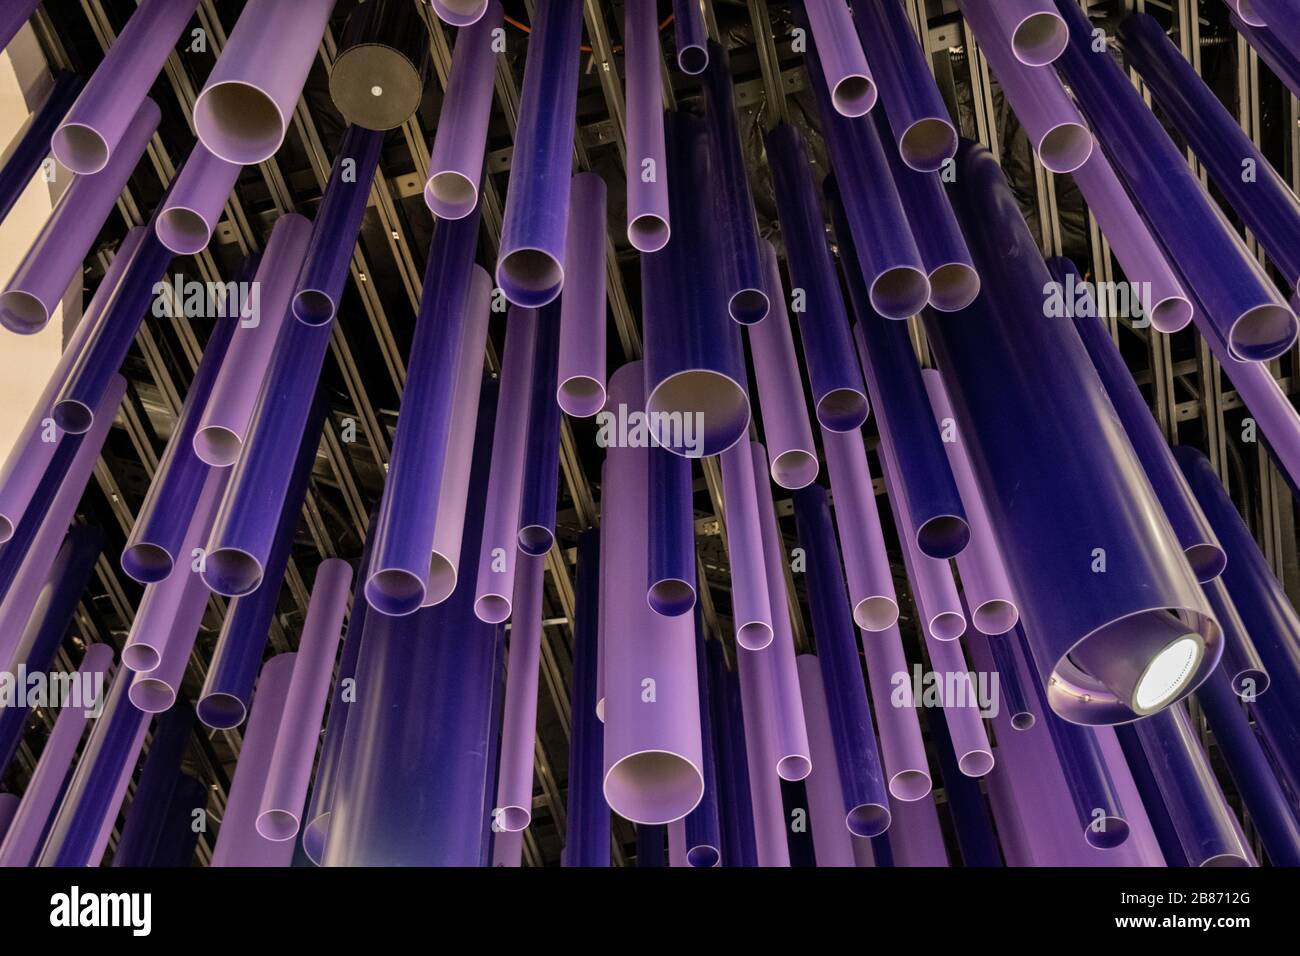 Purple construction pipes stock photo. Image of purple - 13523458